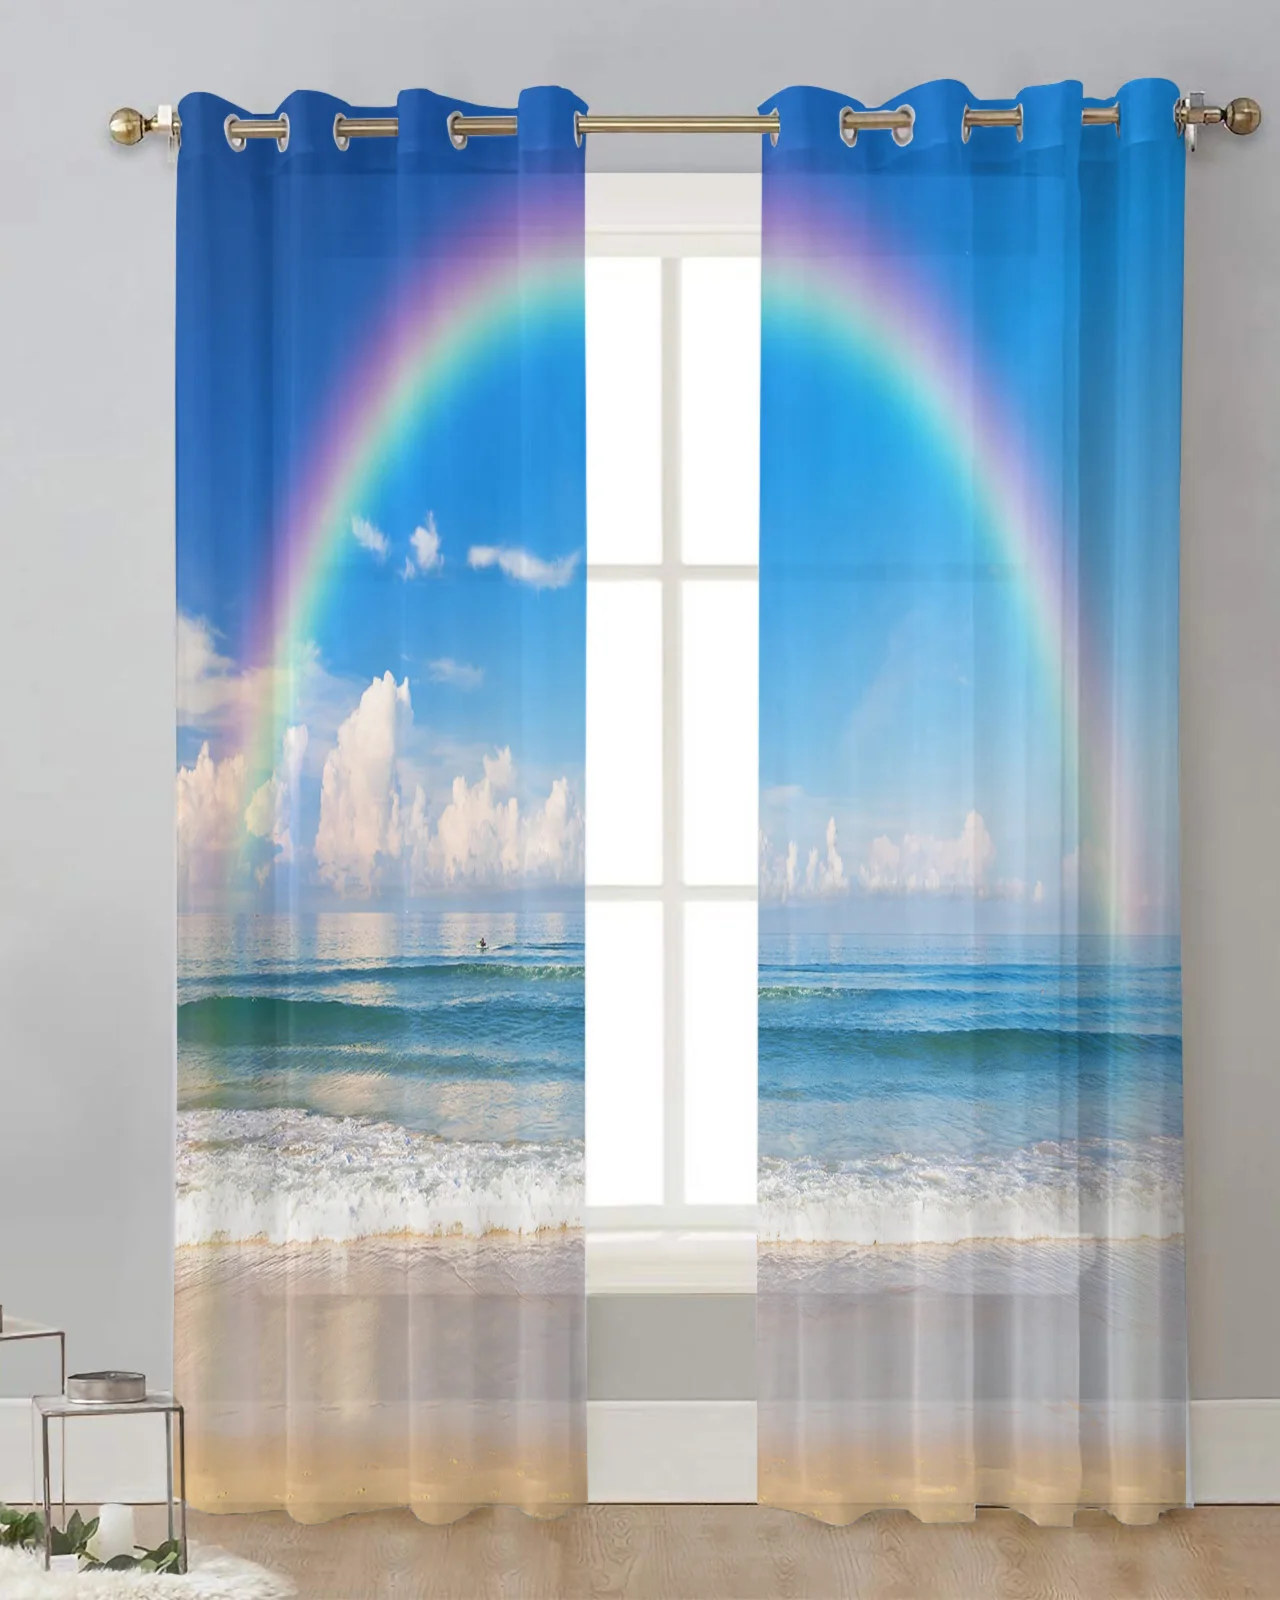 Rainbow Seaside Beach Blue Sky Sheer Curtains for Living Room Tulle Curtains for Kitchen Window Treatment Home Decor Drapes